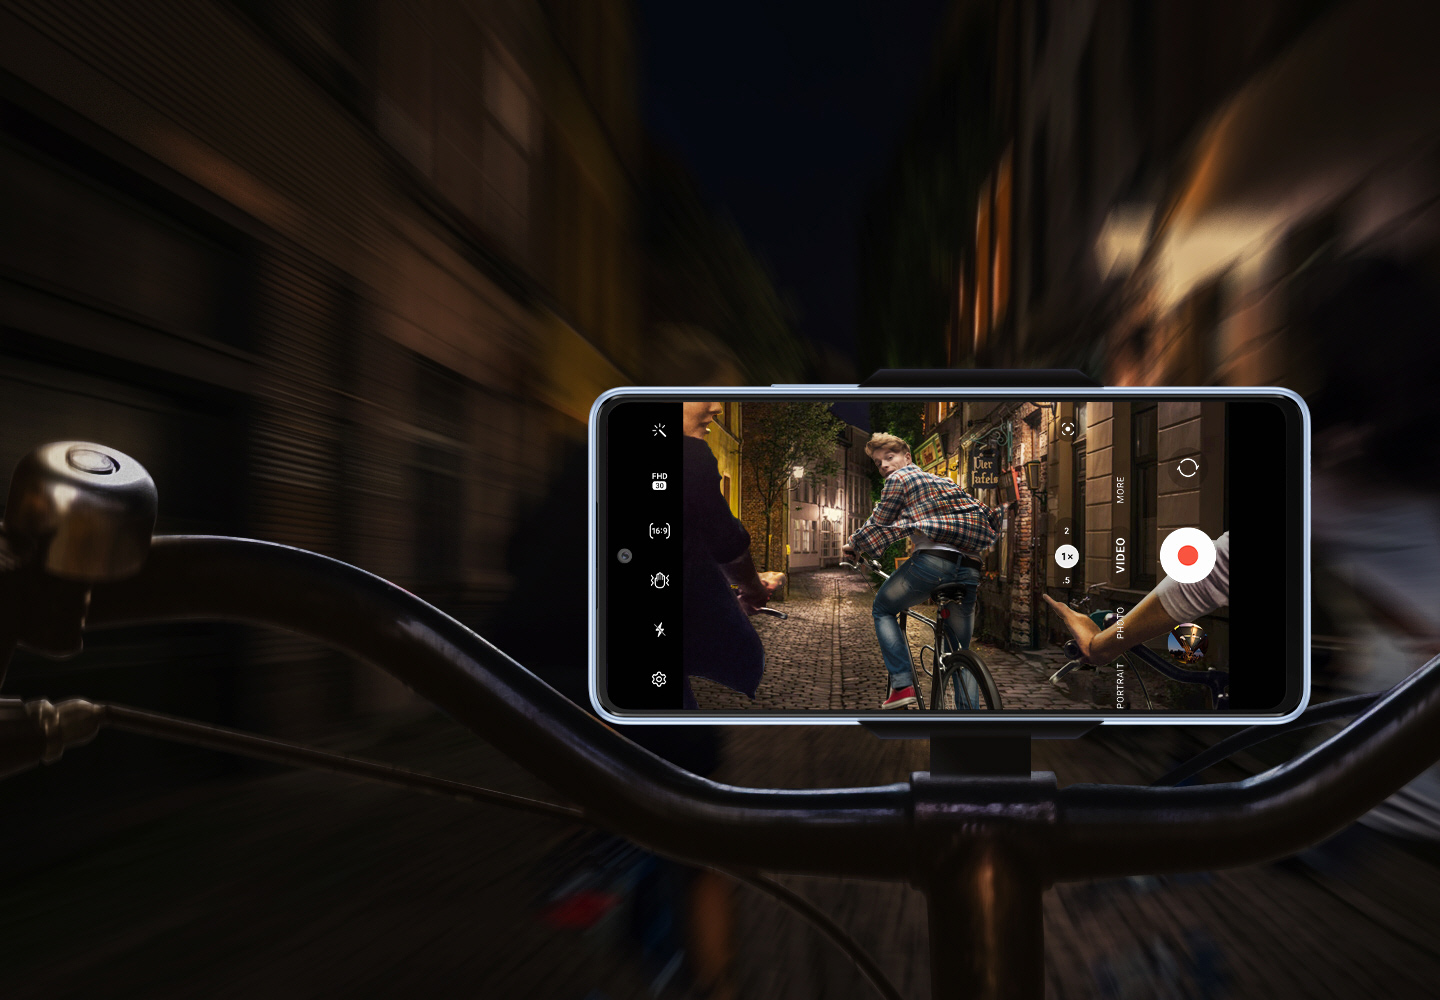 A frontal view of a Galaxy A53 5G mounted horizontally onto a bike handlebar. While the background is blurry and dark, the smartphone screen shows that it is clearly and stably recording what is happening: A group of bike riders are riding through a dimly lit road at night, with the rider furthest ahead looking back at the phone.